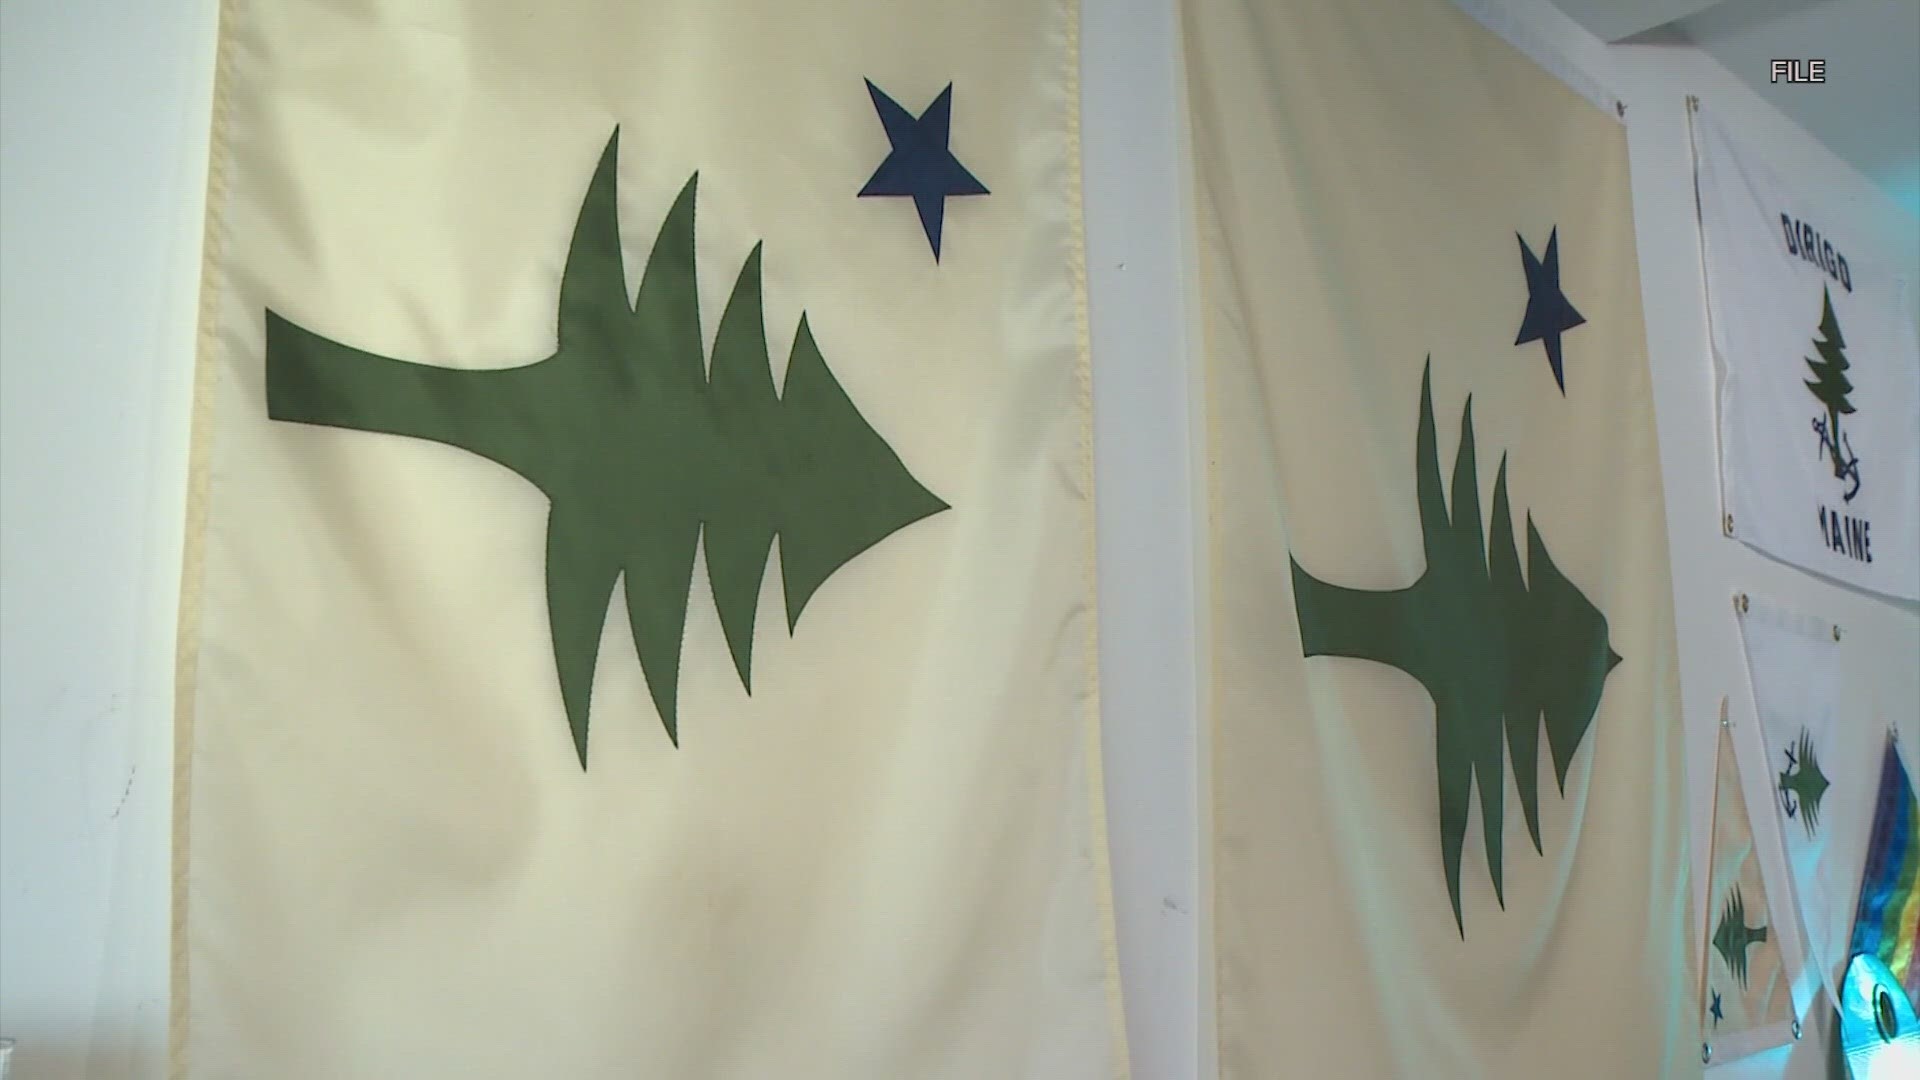 The new flag up for election is based on the state's original 1901 flag and will feature a beige background with a green pine tree and a lone blue star.